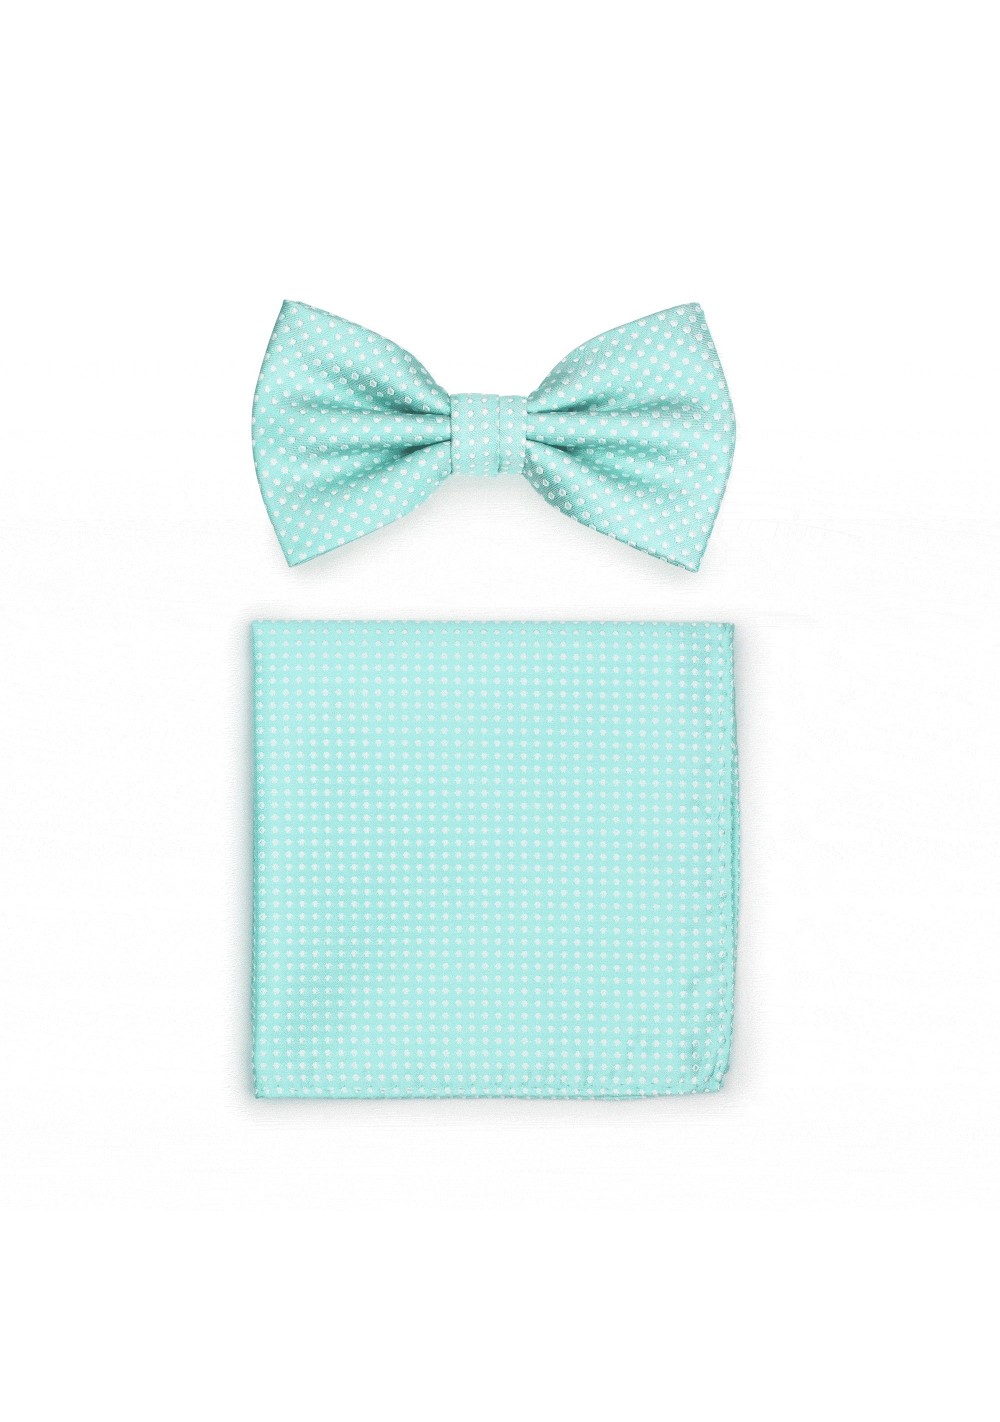 Pin Dot Bow Tie and Hanky Set in Seamist